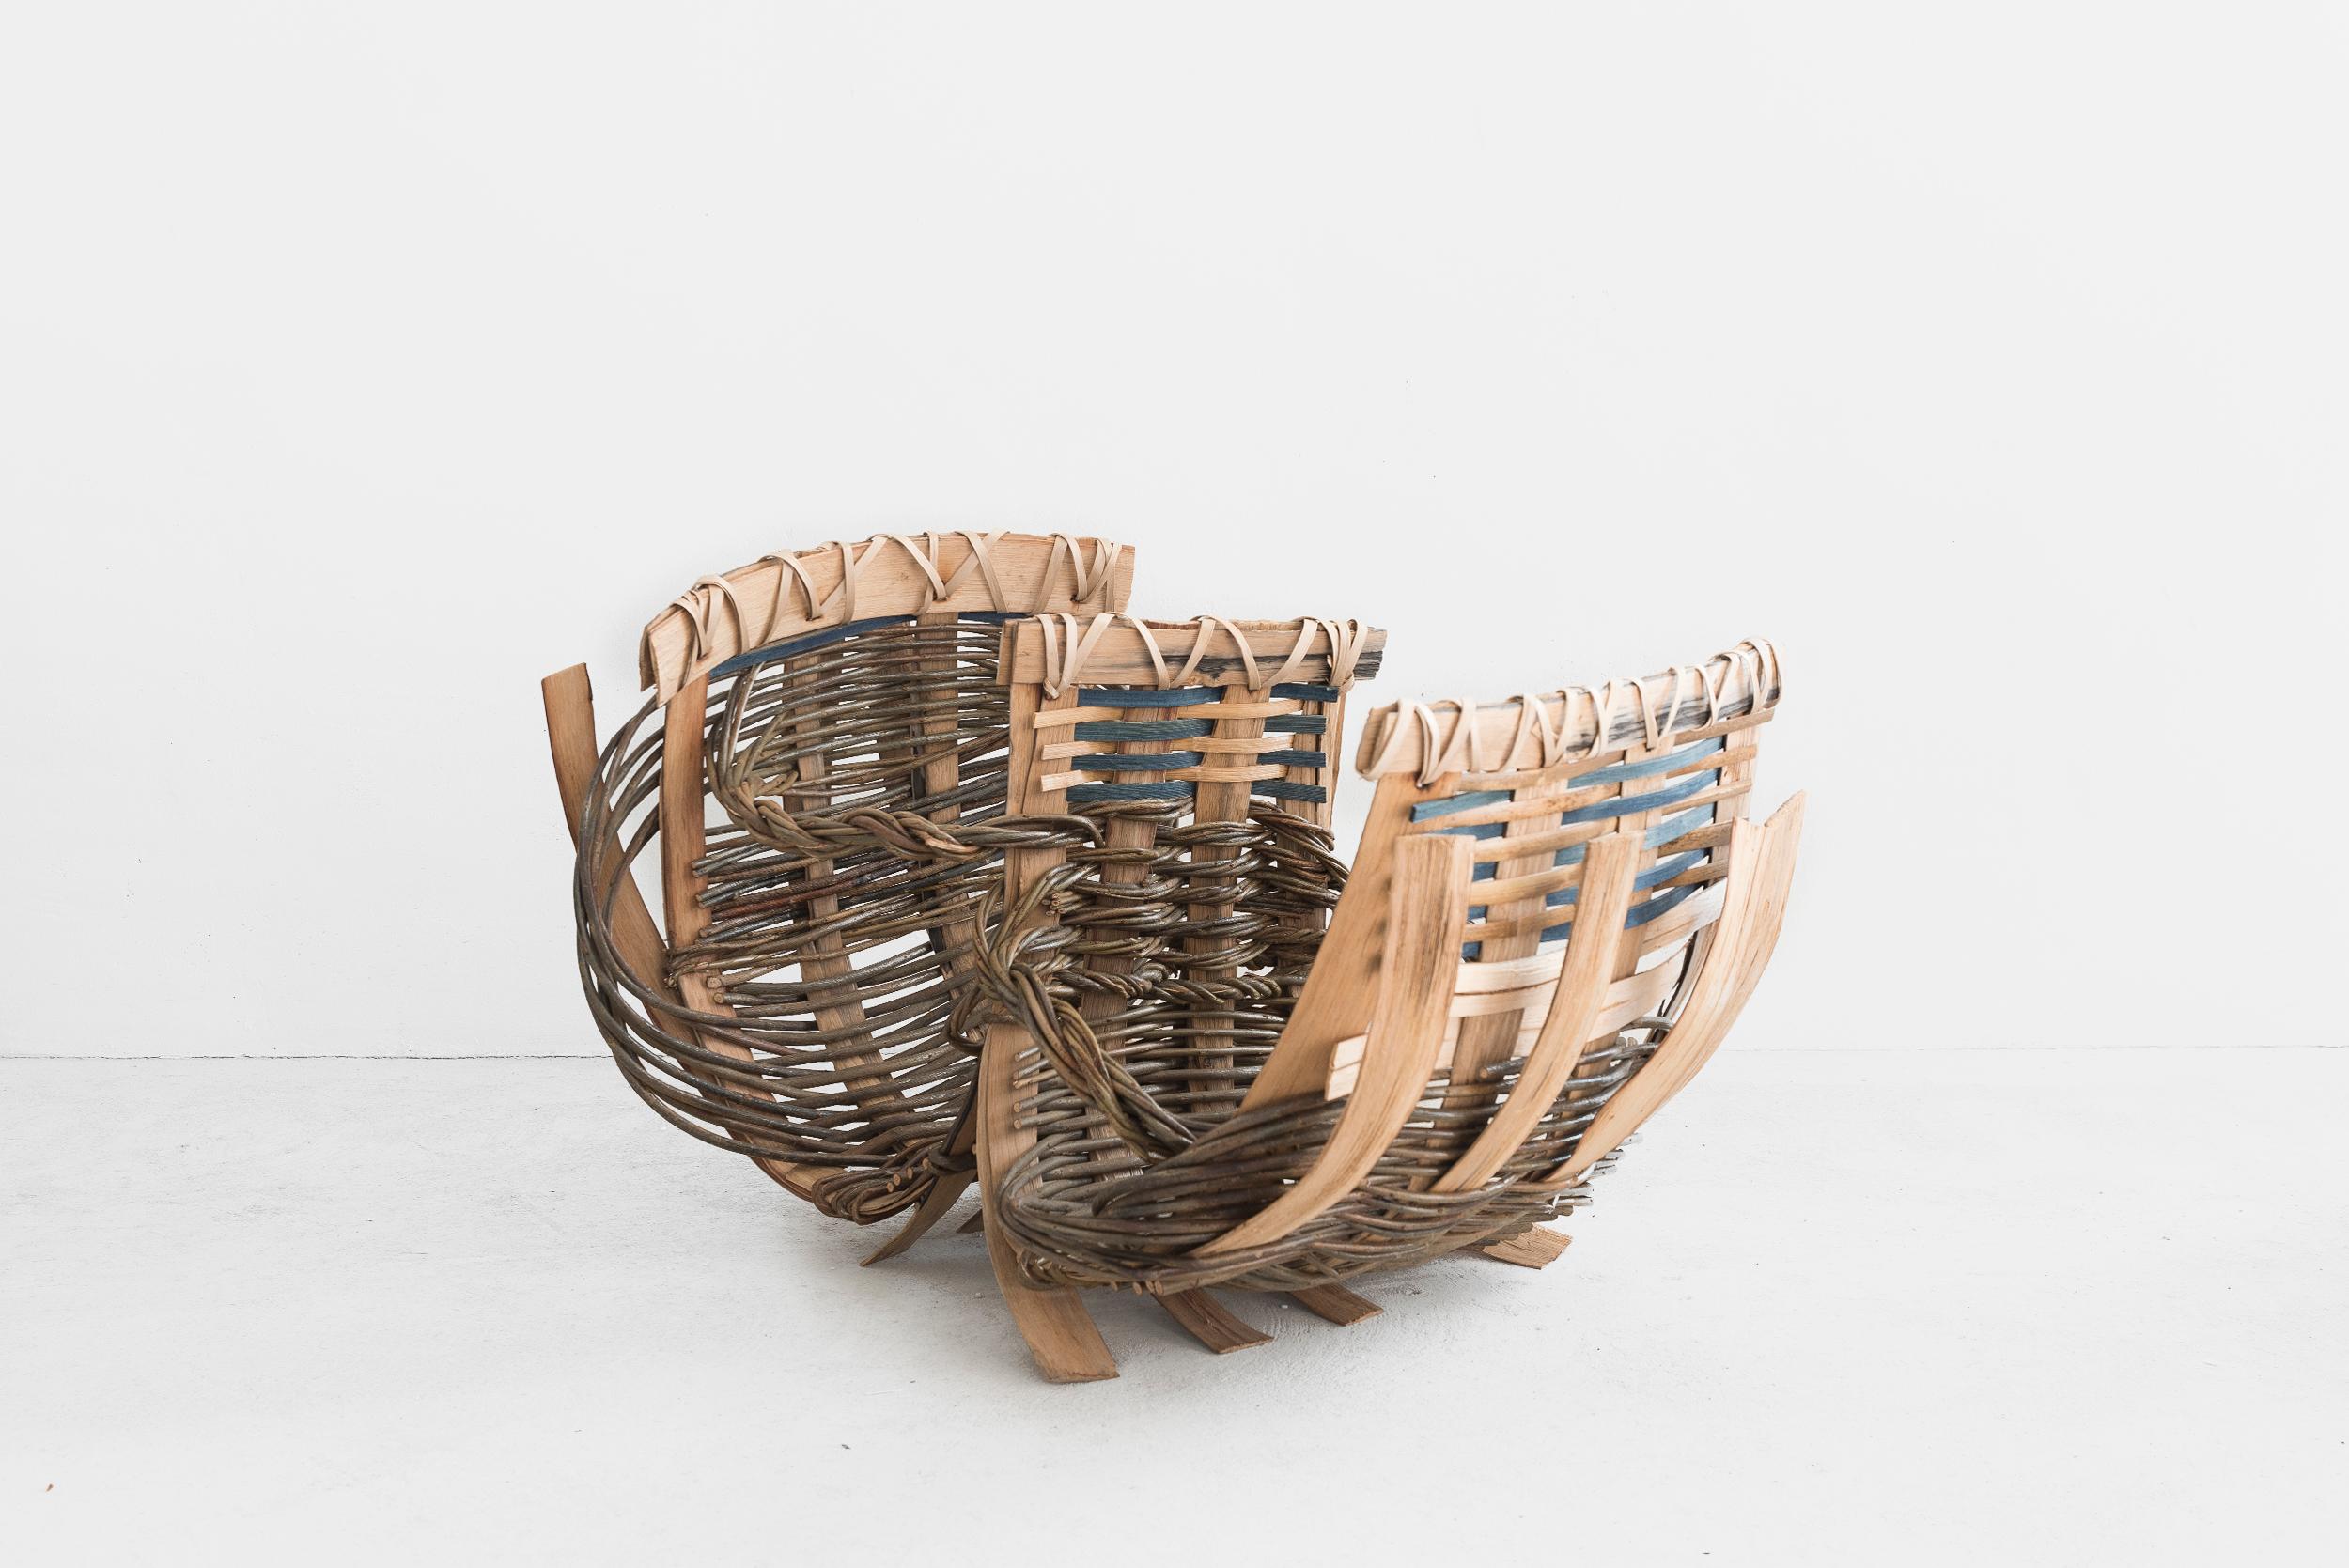 Hilary Burns 
Pair of baskets
Manufactured by Hillary Burns
Produced in exclusive for SIDE GALLERY
Devon (England), 2019
Catalan Carpace 

DOUBLE BASKET
Willow, split Cornish bamboo, cleft chestnut, pounded ash, indigo dye
Measurements: 80